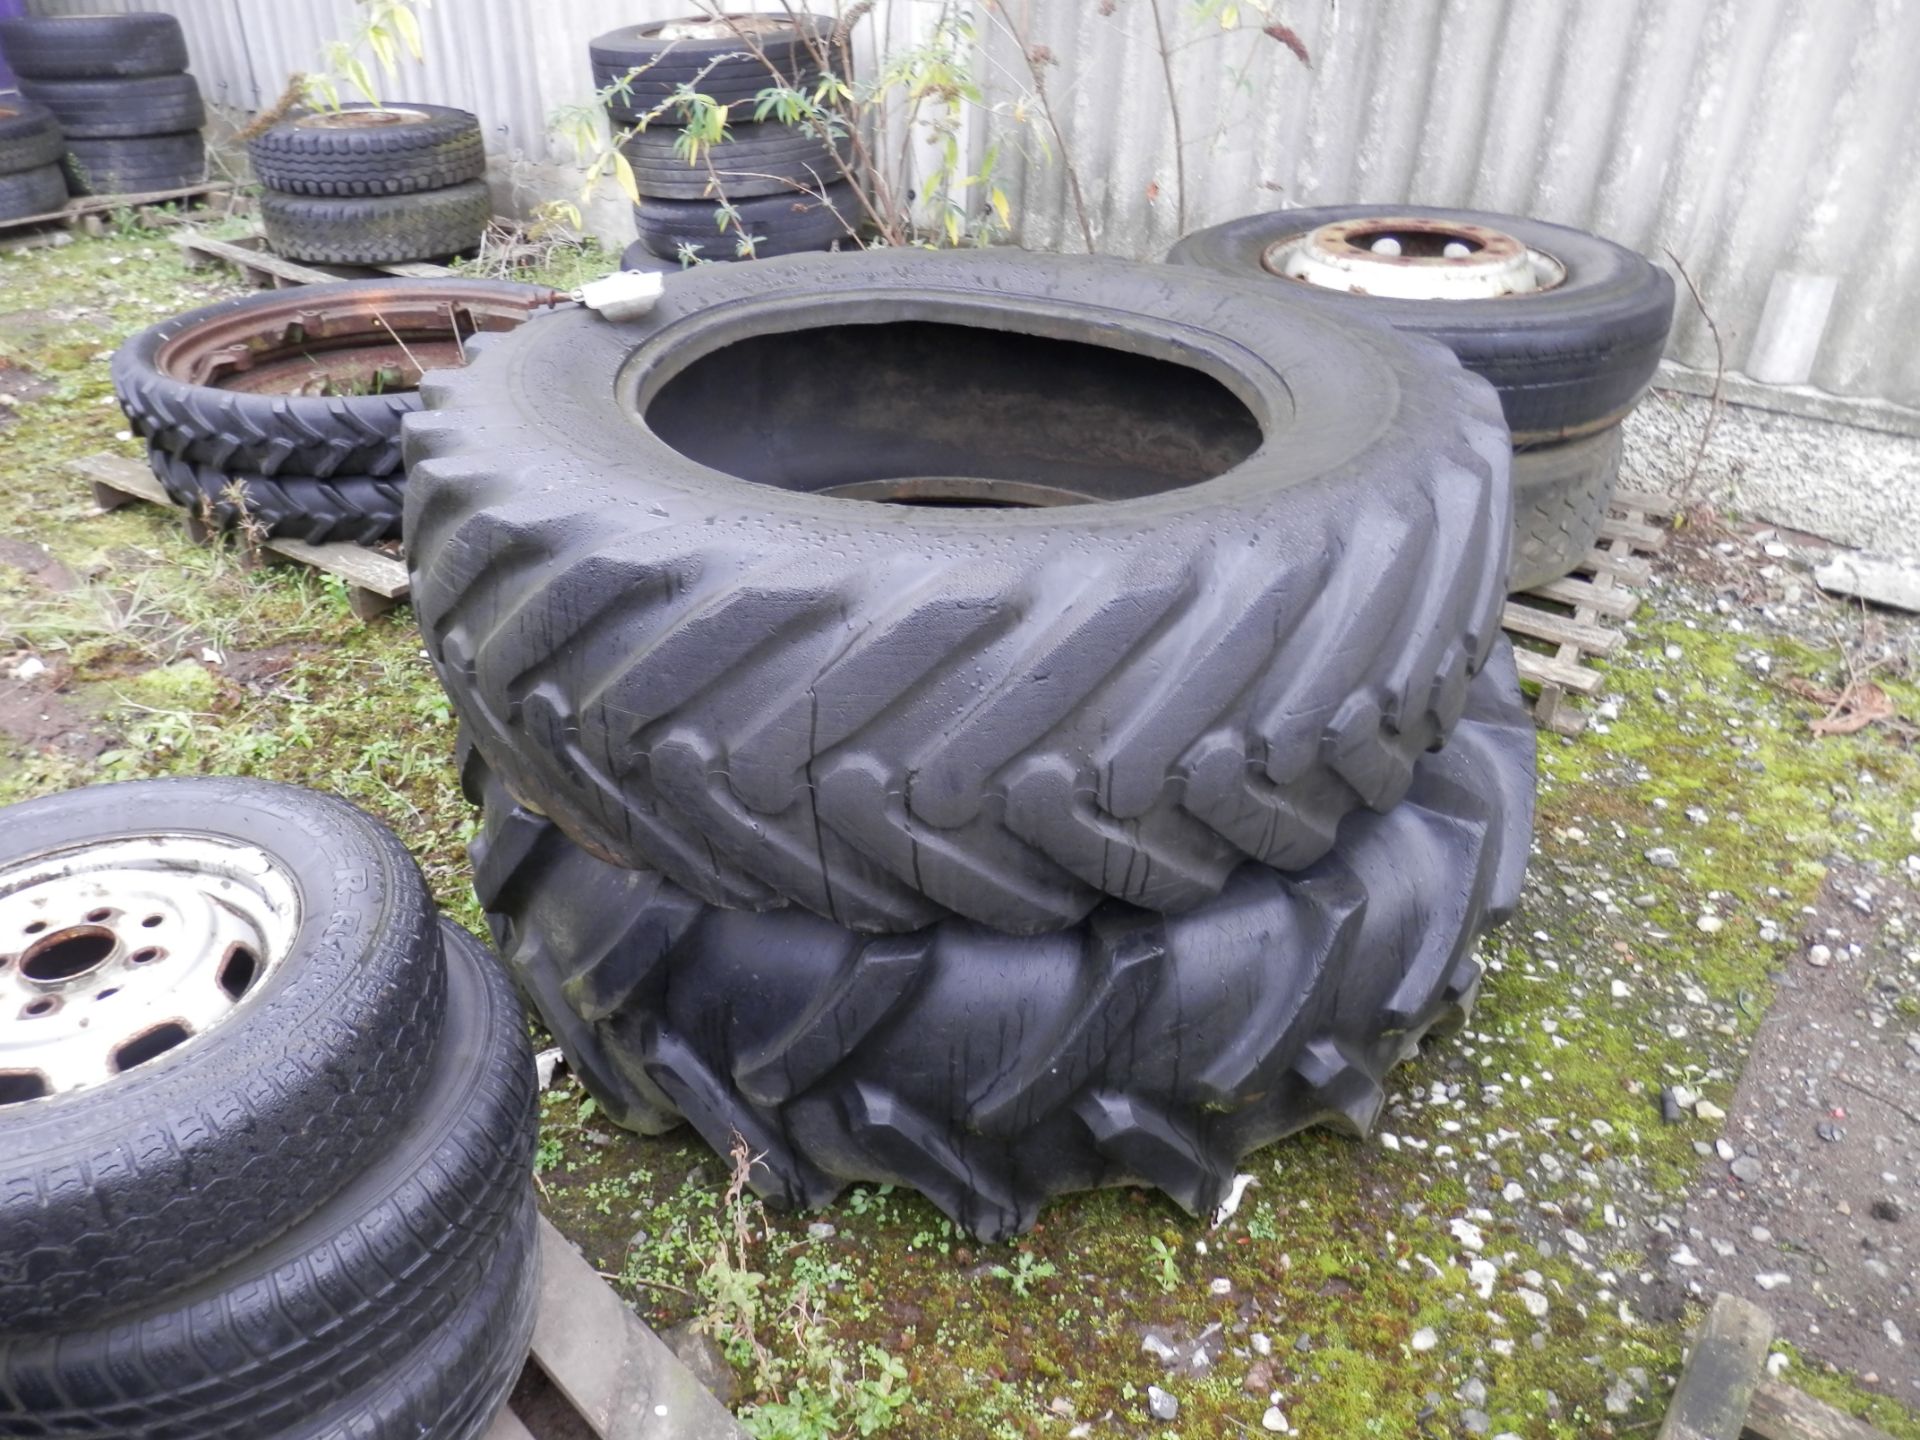 85 + ASSORTED LORRY, CAR & TRAILER TYRES & WHEELS, AS PICTURED. BUYER TO COLLECT COMPLETE JOBLOT. - Image 2 of 10